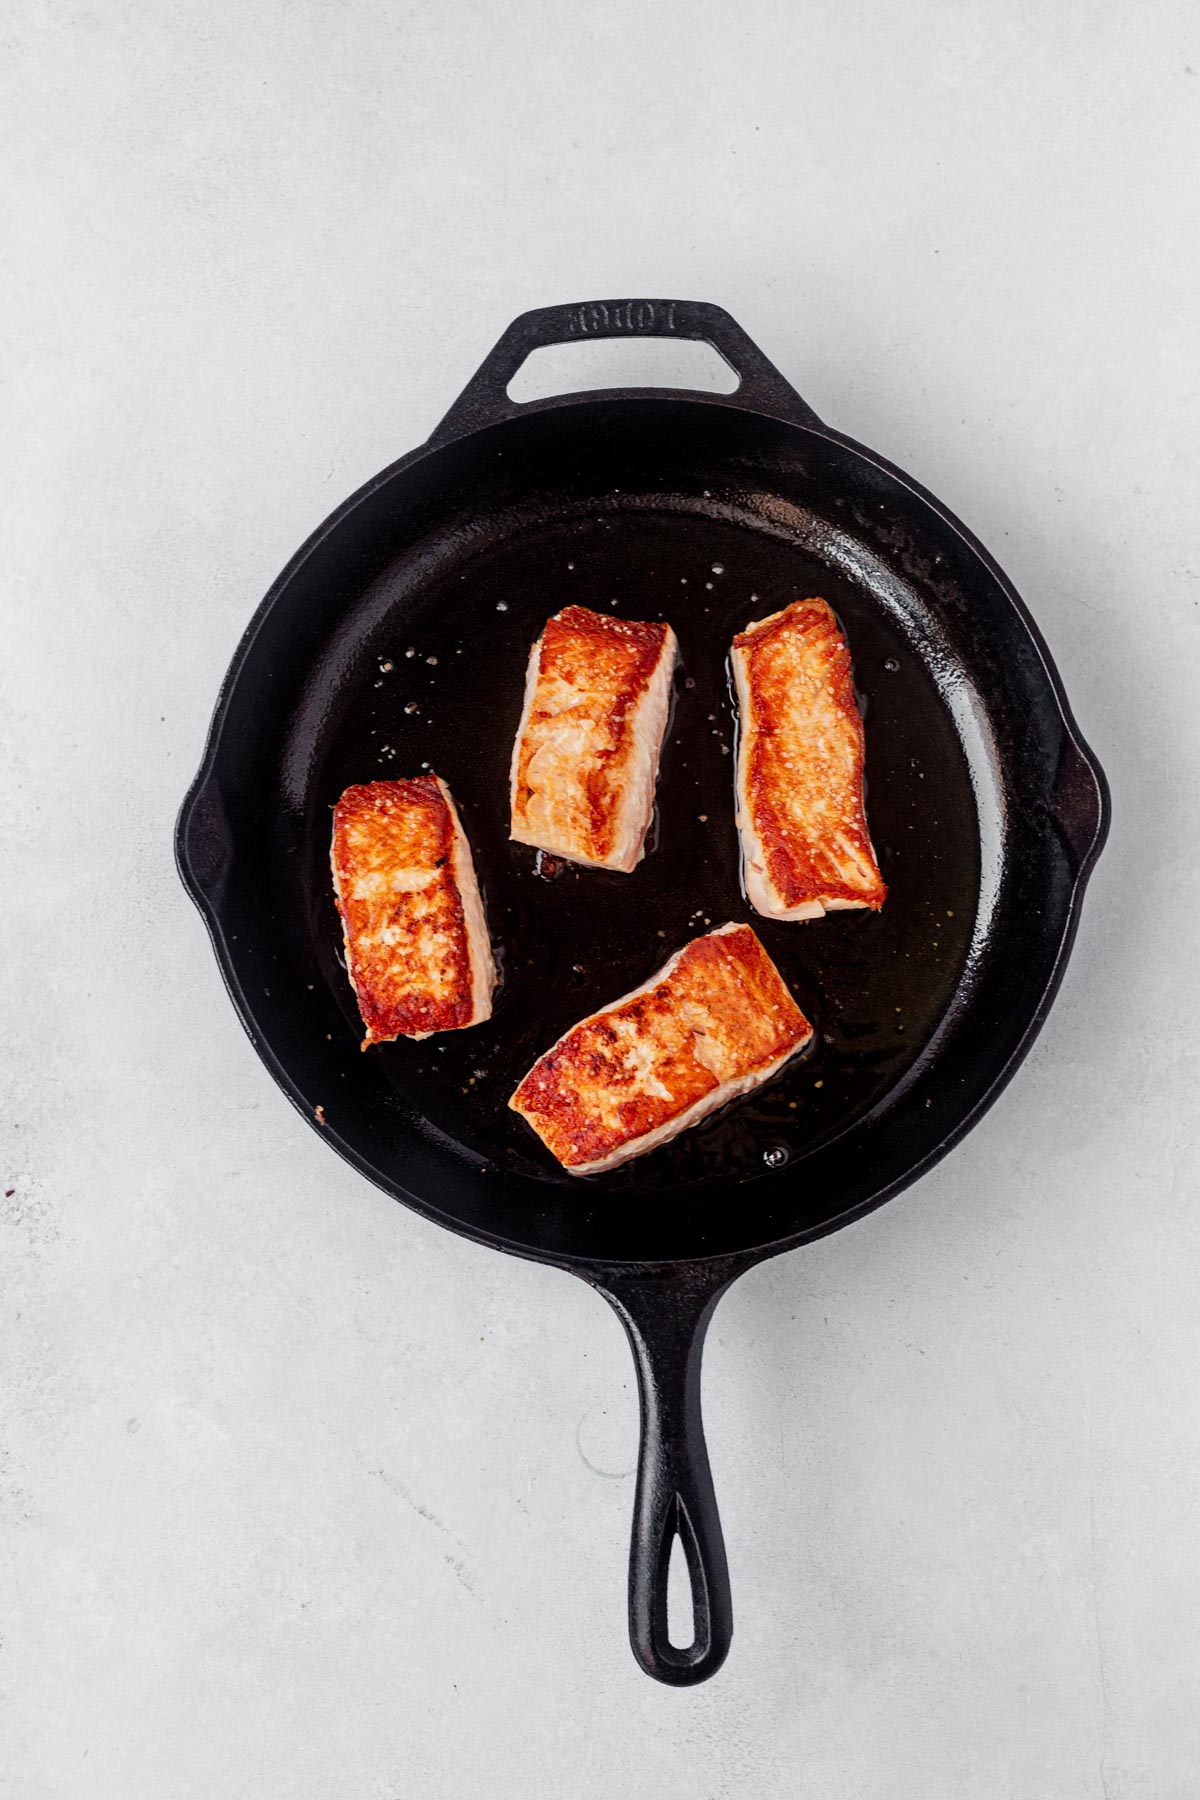 4 pieces of seared salmon in a cast iron skillet